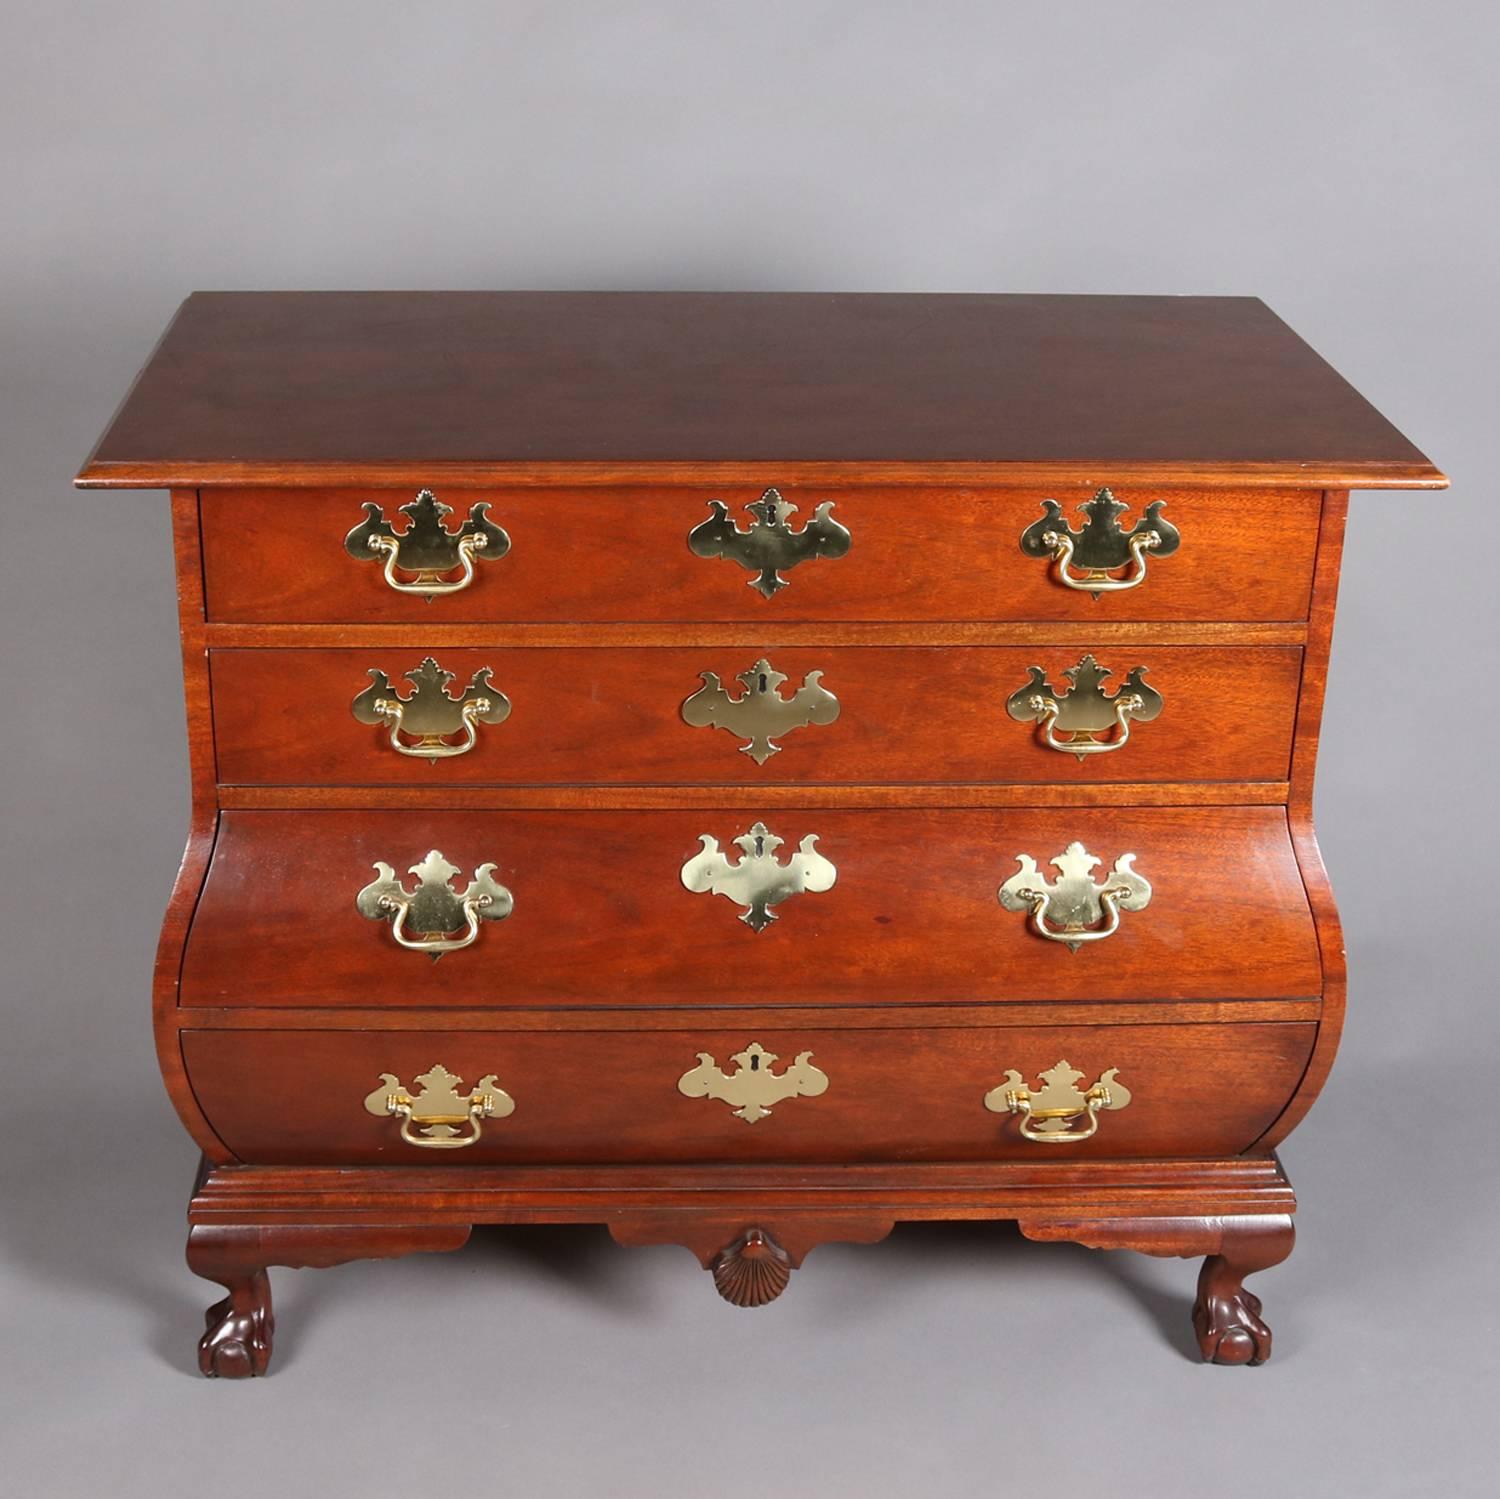 Historic Charleston Chippendale chest by Baker Furniture Company features mahogany construction with Bombe swell front form and having four drawers, skirt with central carved shell, and seated on claw and ball feet; original brasses included